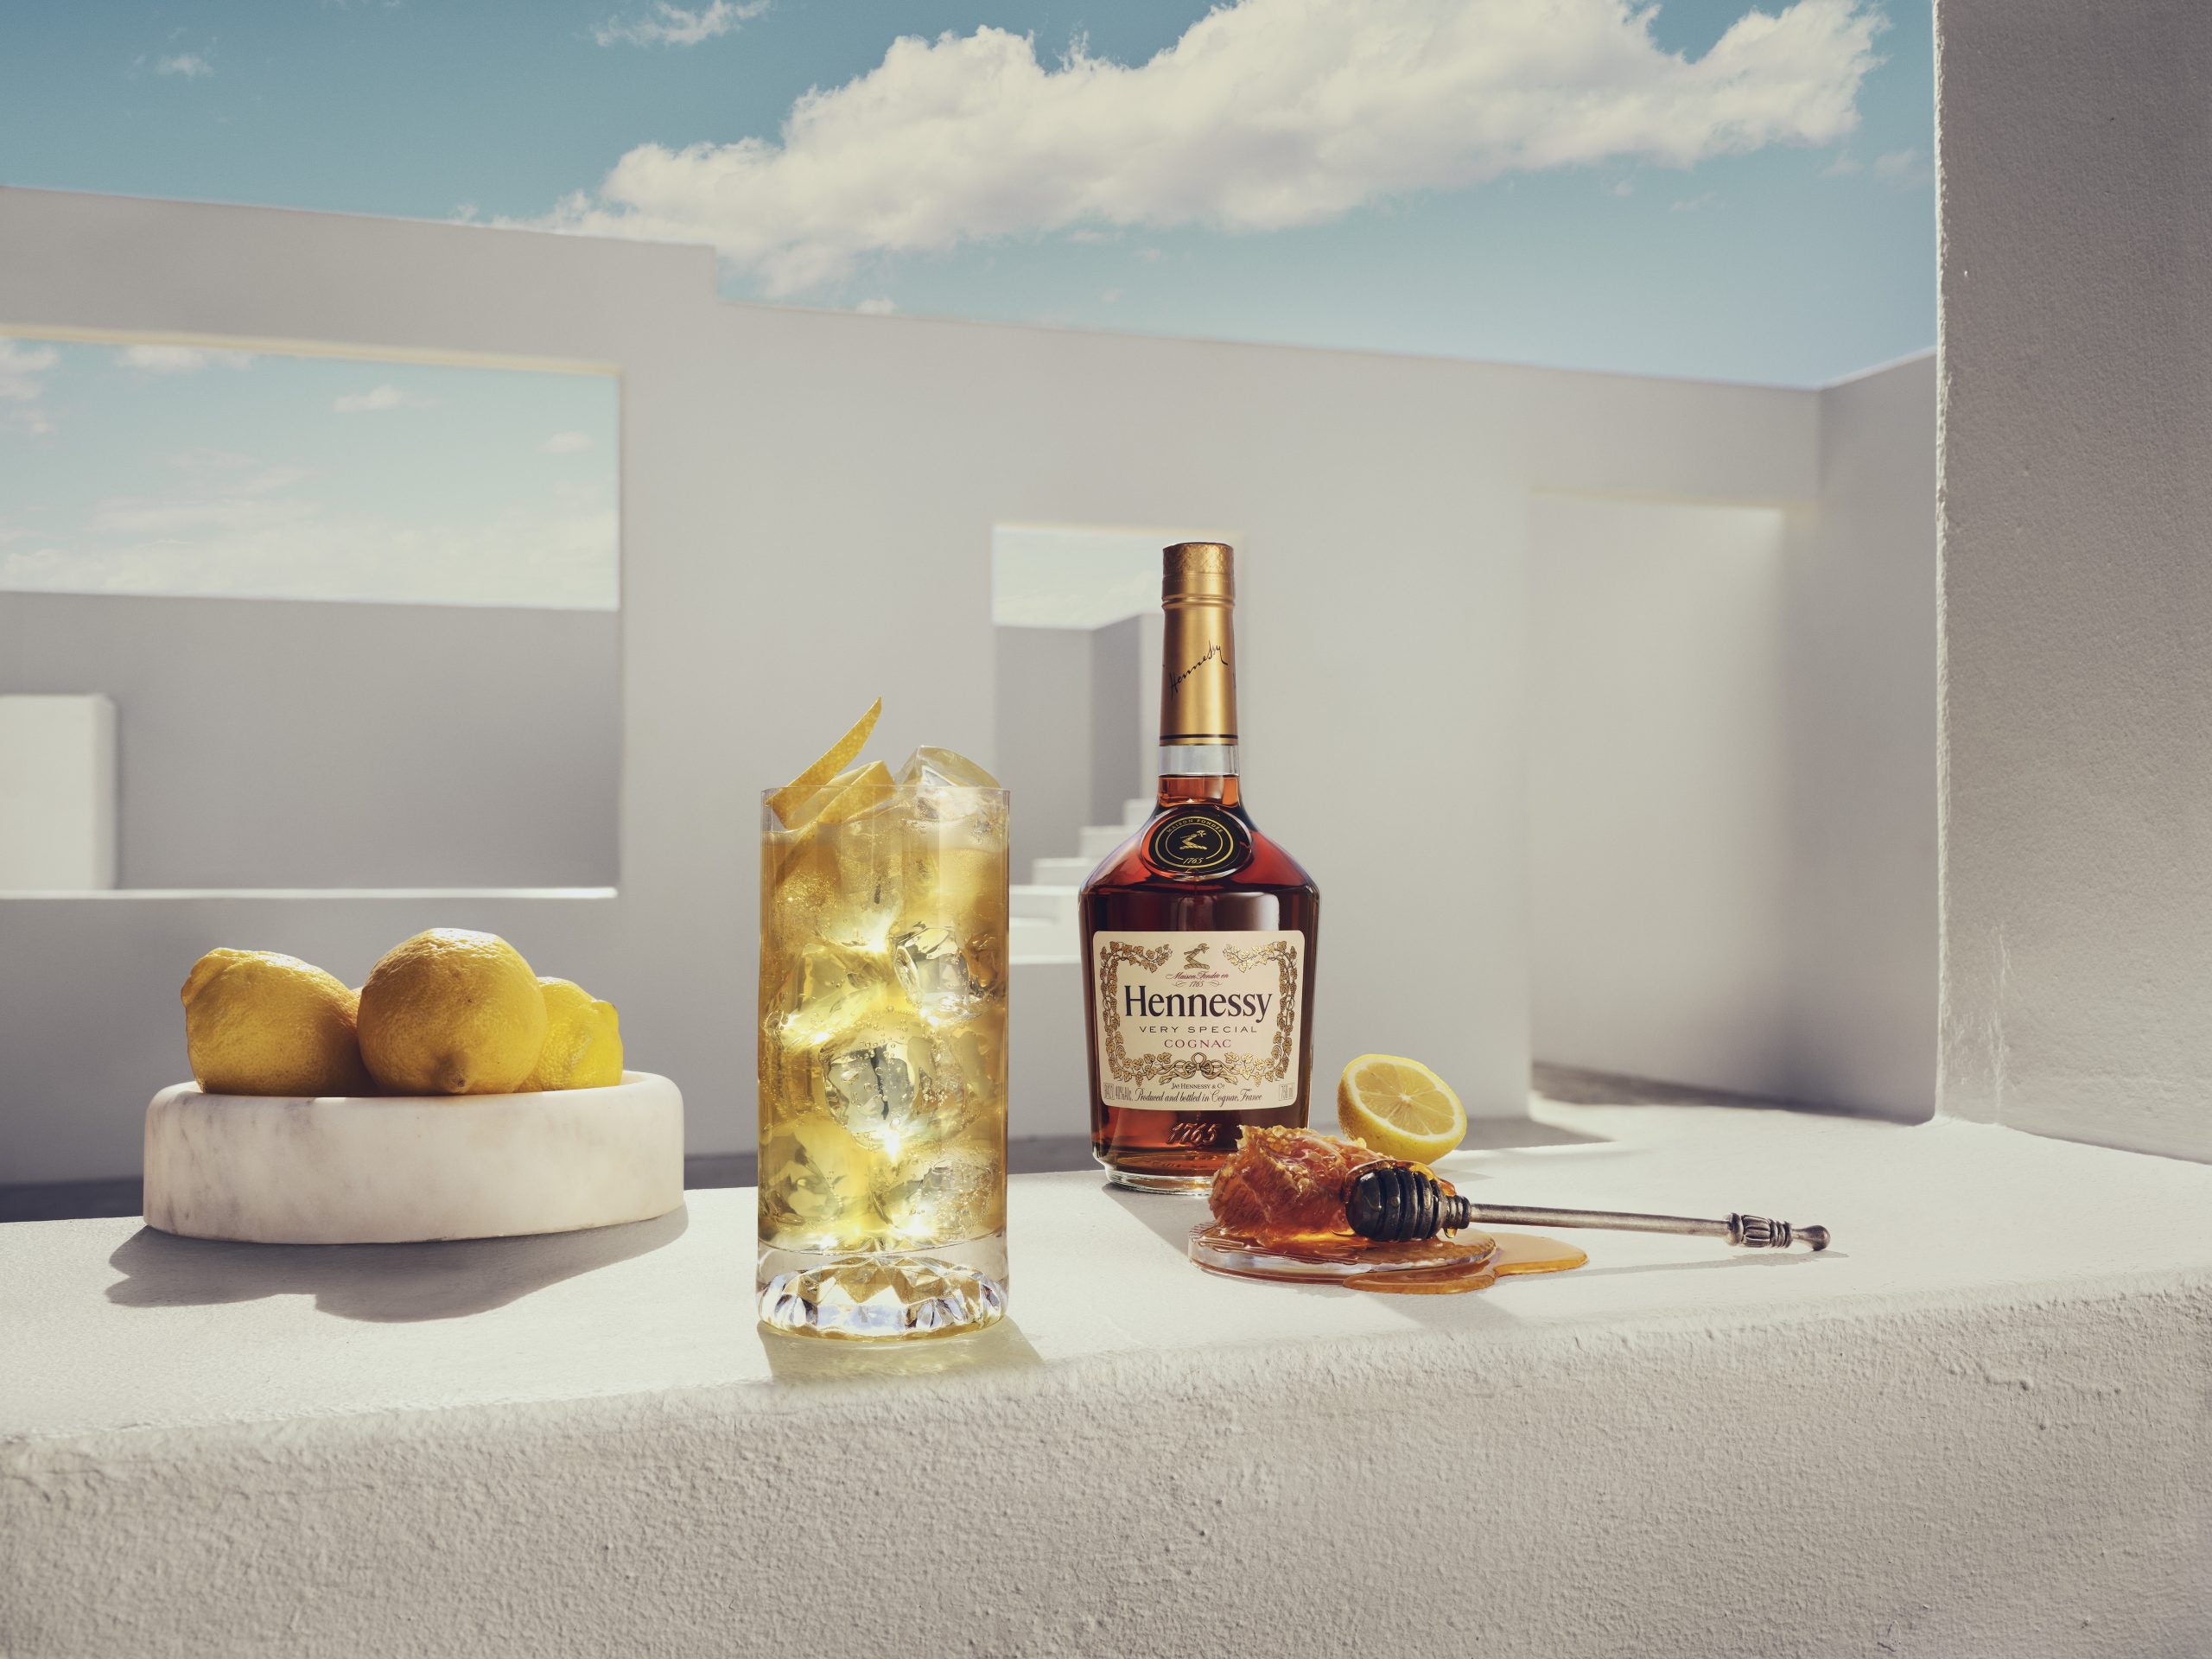 Let’s Toast: Teyana Taylor And Damson Idris Team Up To Launch Hennessy’s Newest “Made For More” Campaign